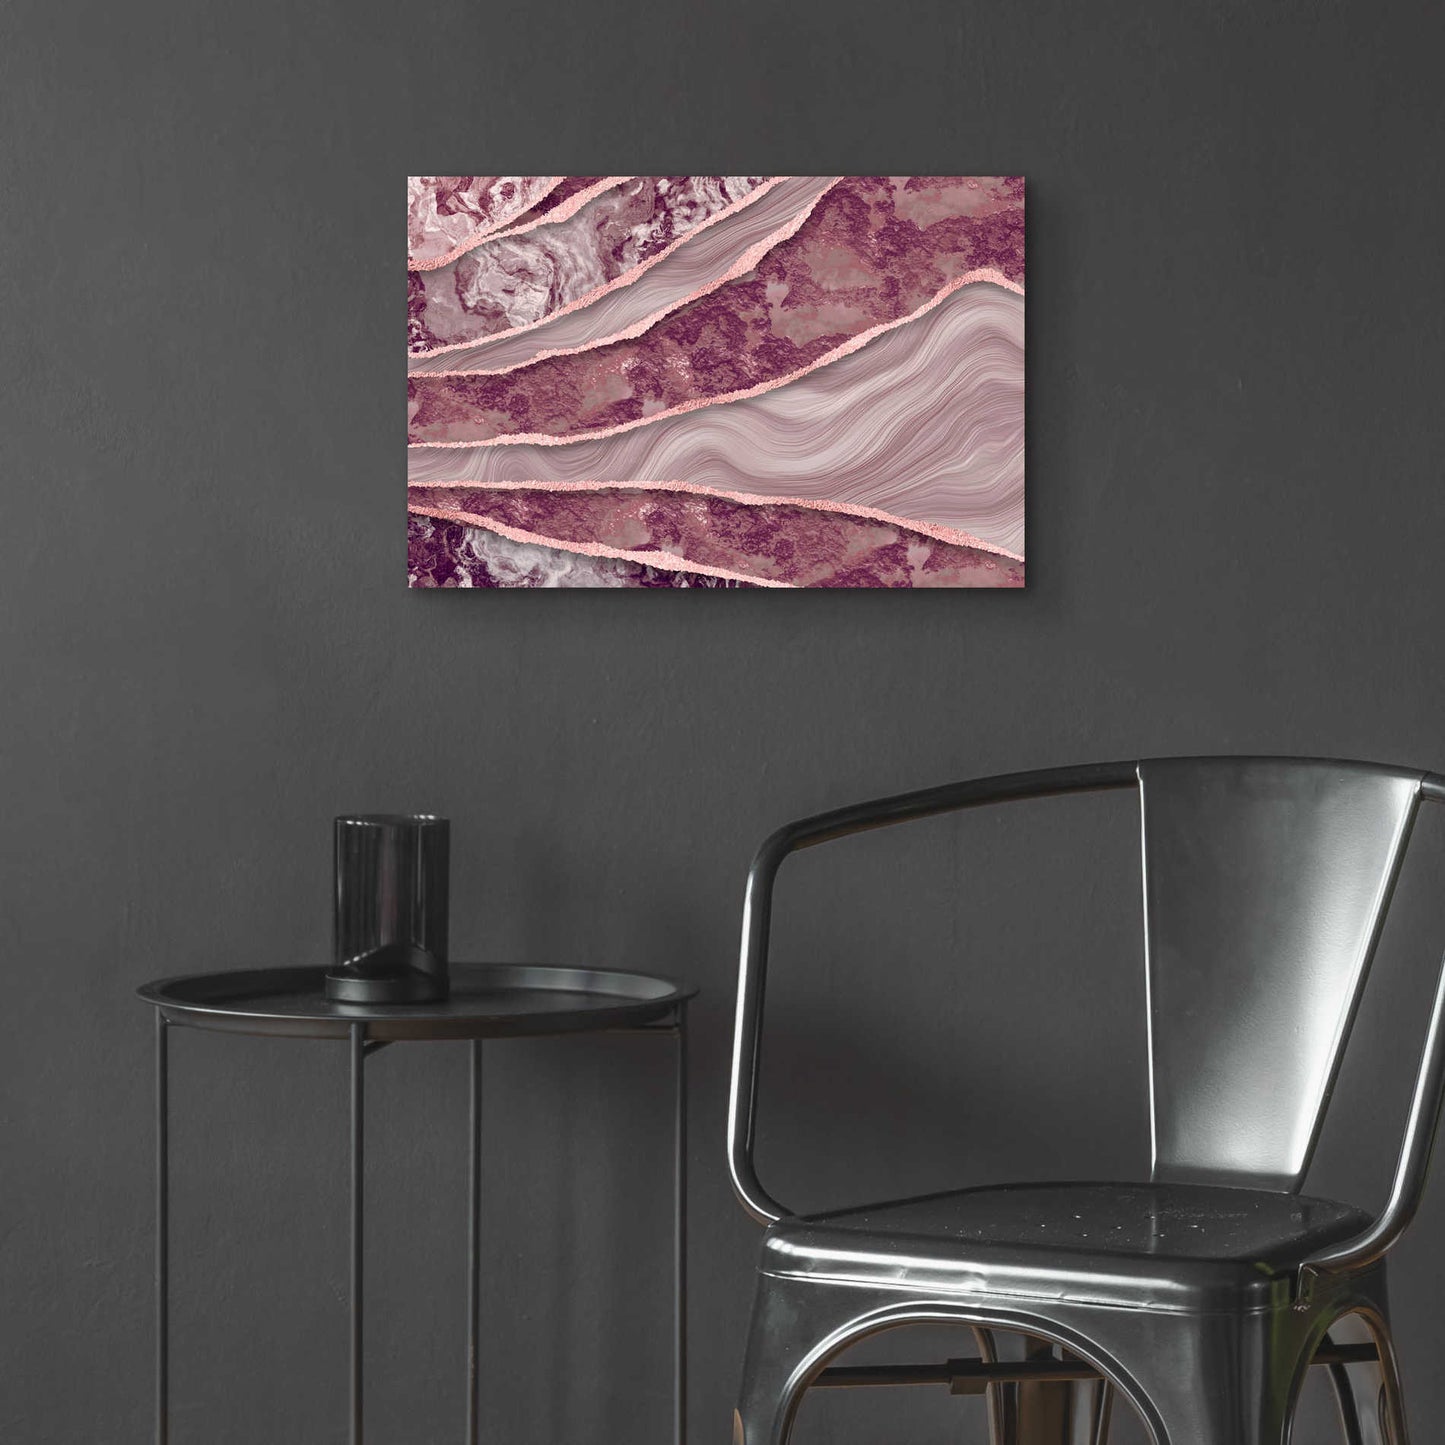 Epic Art 'Rose Quartz Marble And Stone' by Andrea Haase Acrylic Glass Wall Art,24x16